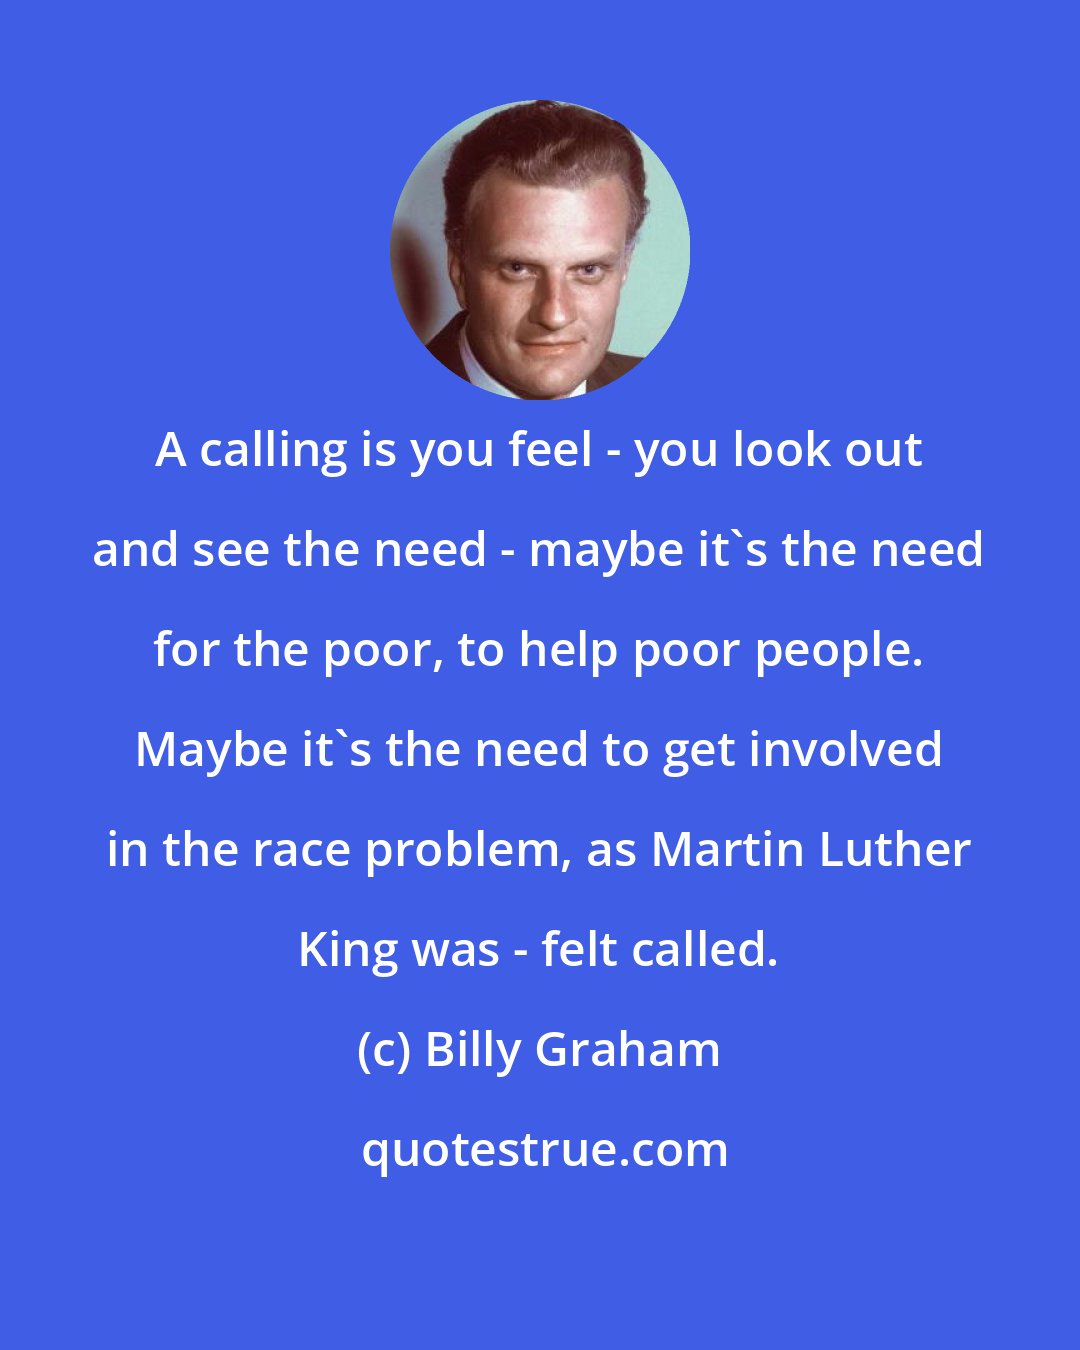 Billy Graham: A calling is you feel - you look out and see the need - maybe it's the need for the poor, to help poor people. Maybe it's the need to get involved in the race problem, as Martin Luther King was - felt called.